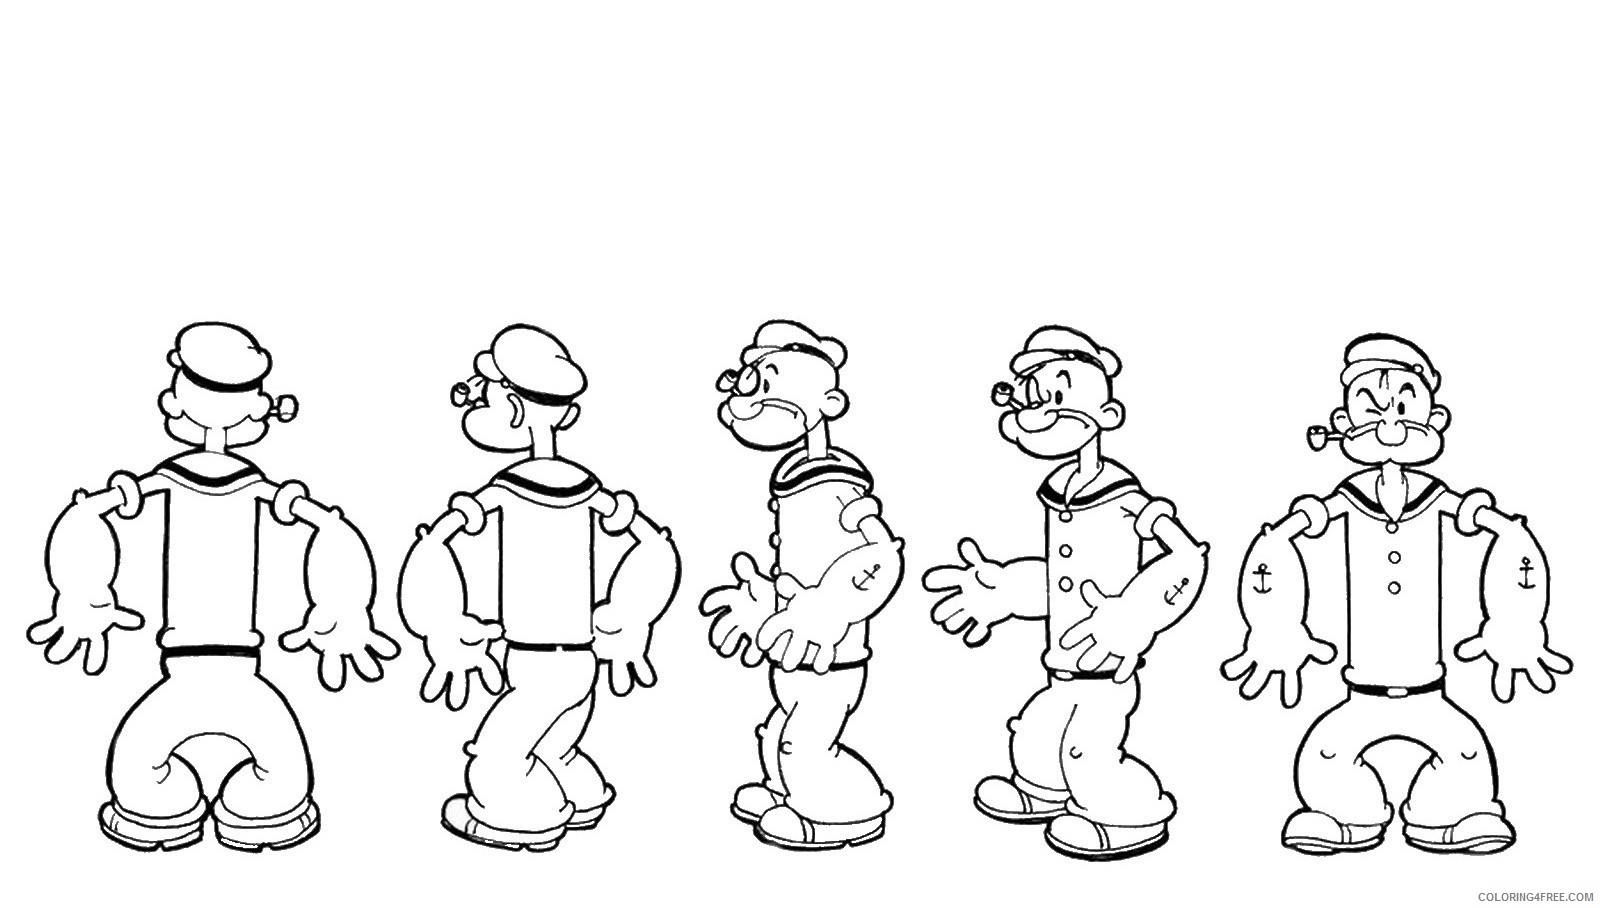 Popeye Coloring Pages Cartoons popeye_cl_30 Printable 2020 5038 Coloring4free